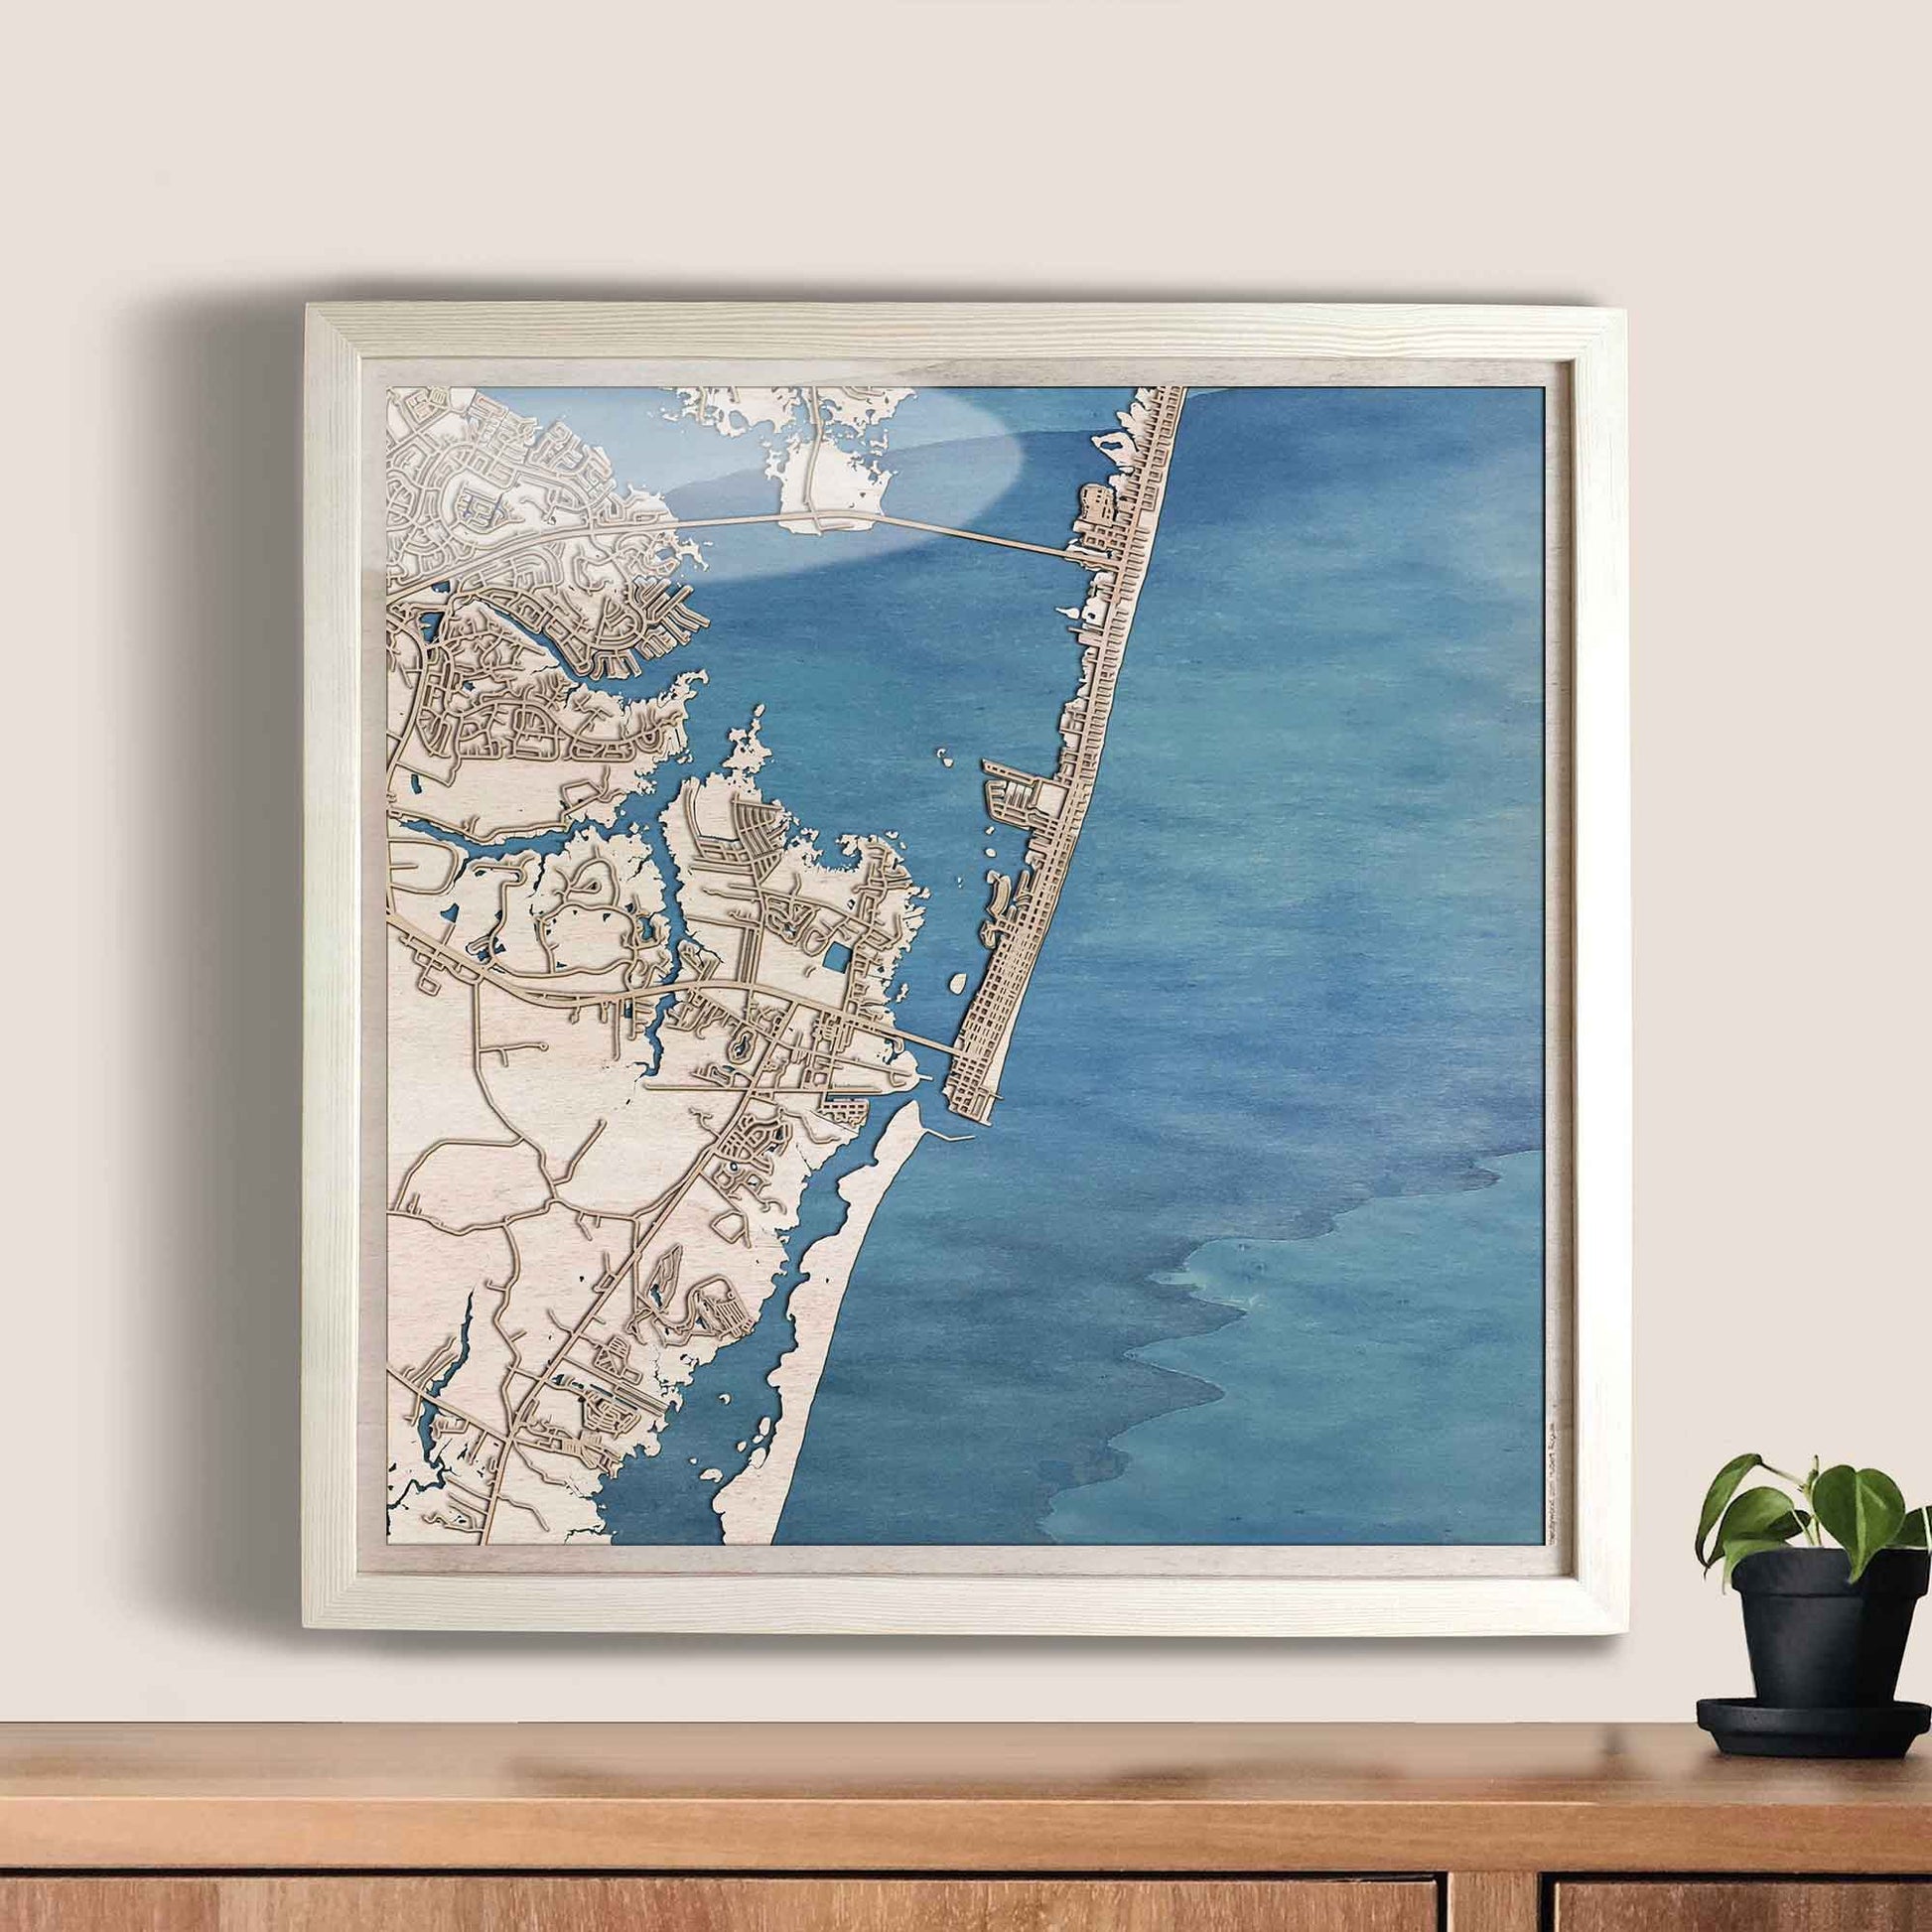 Ocean City Wooden Map by CityWood - Custom Wood Map Art - Unique Laser Cut Engraved - Anniversary Gift